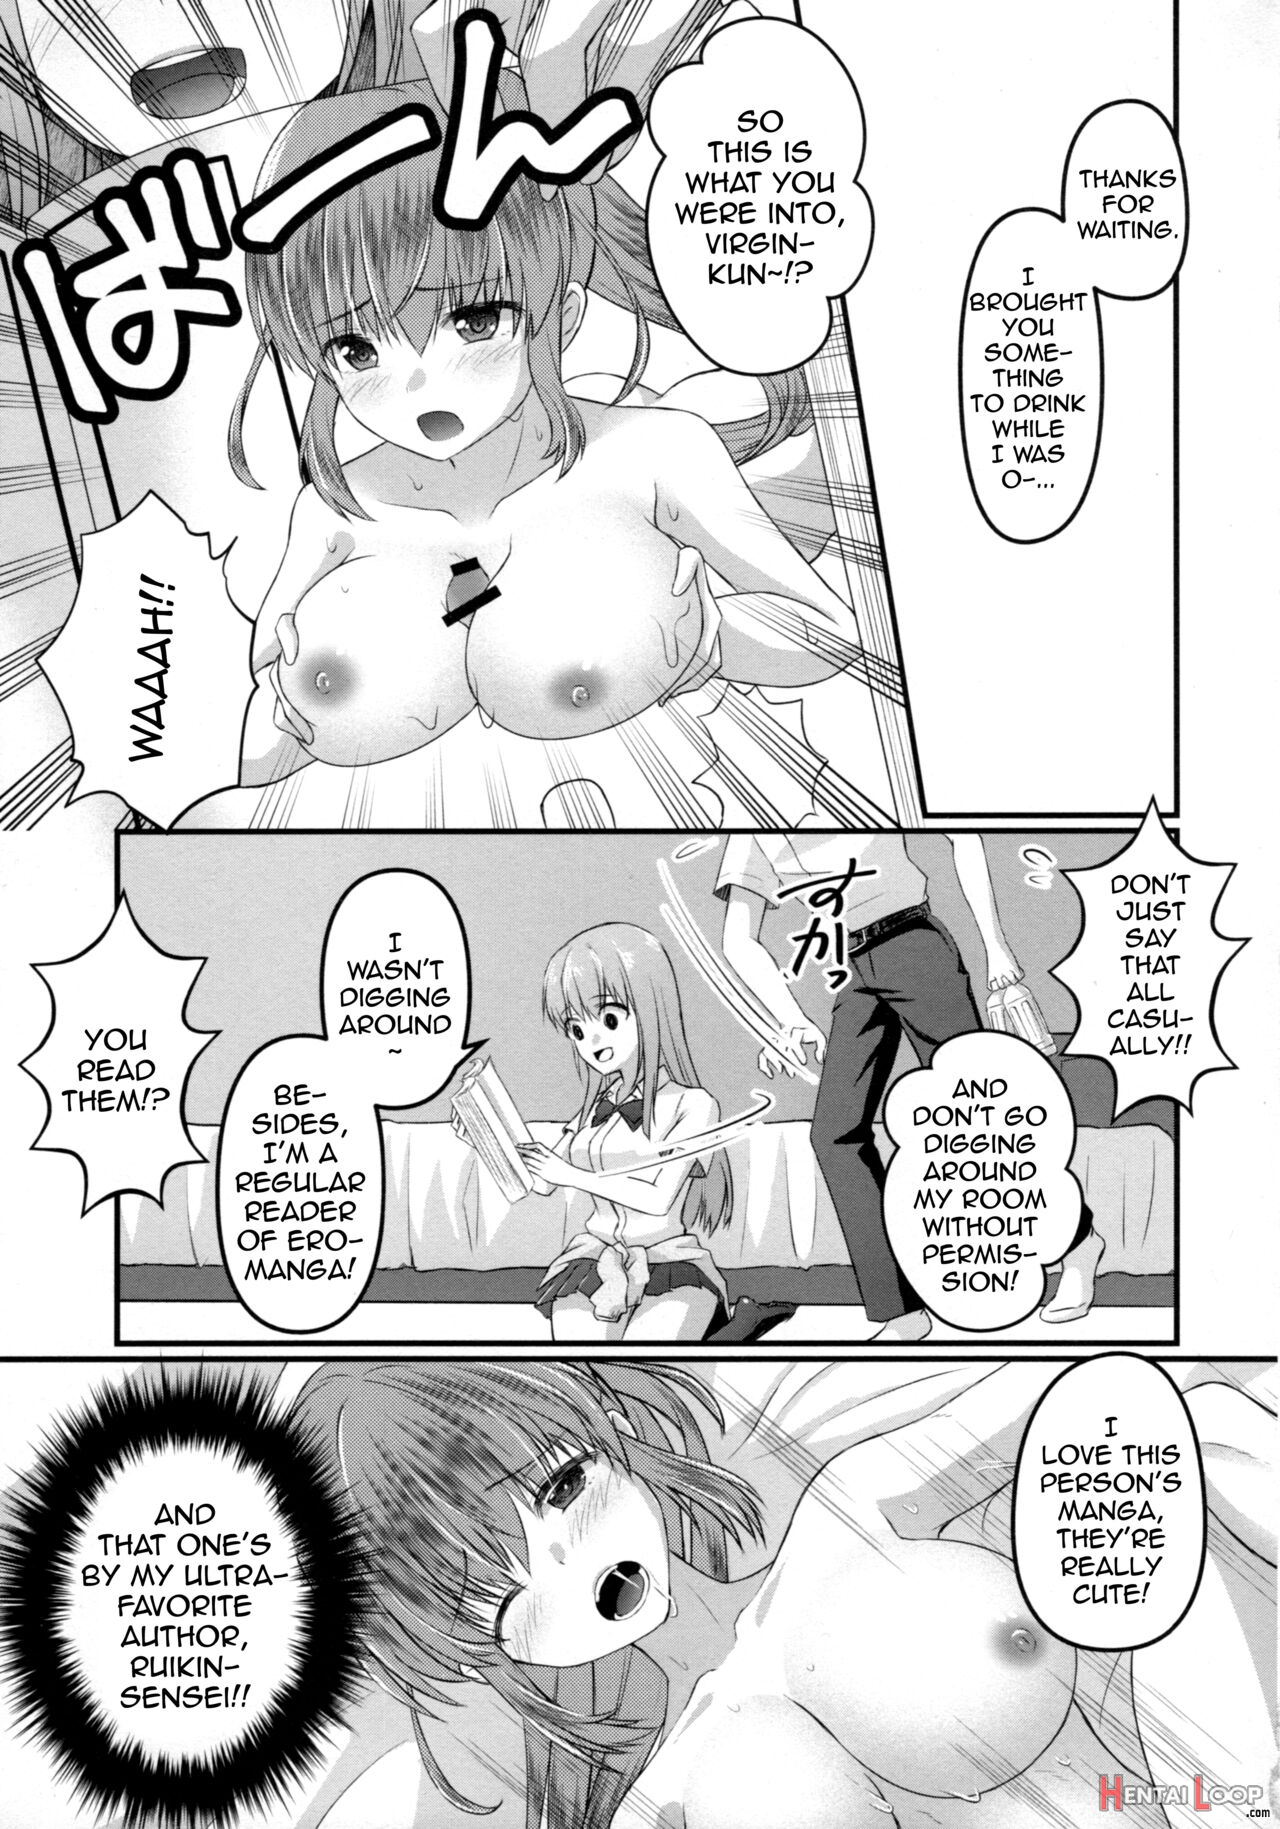 This Gal Tries To Beat An Otaku At Both Games And Sex page 6